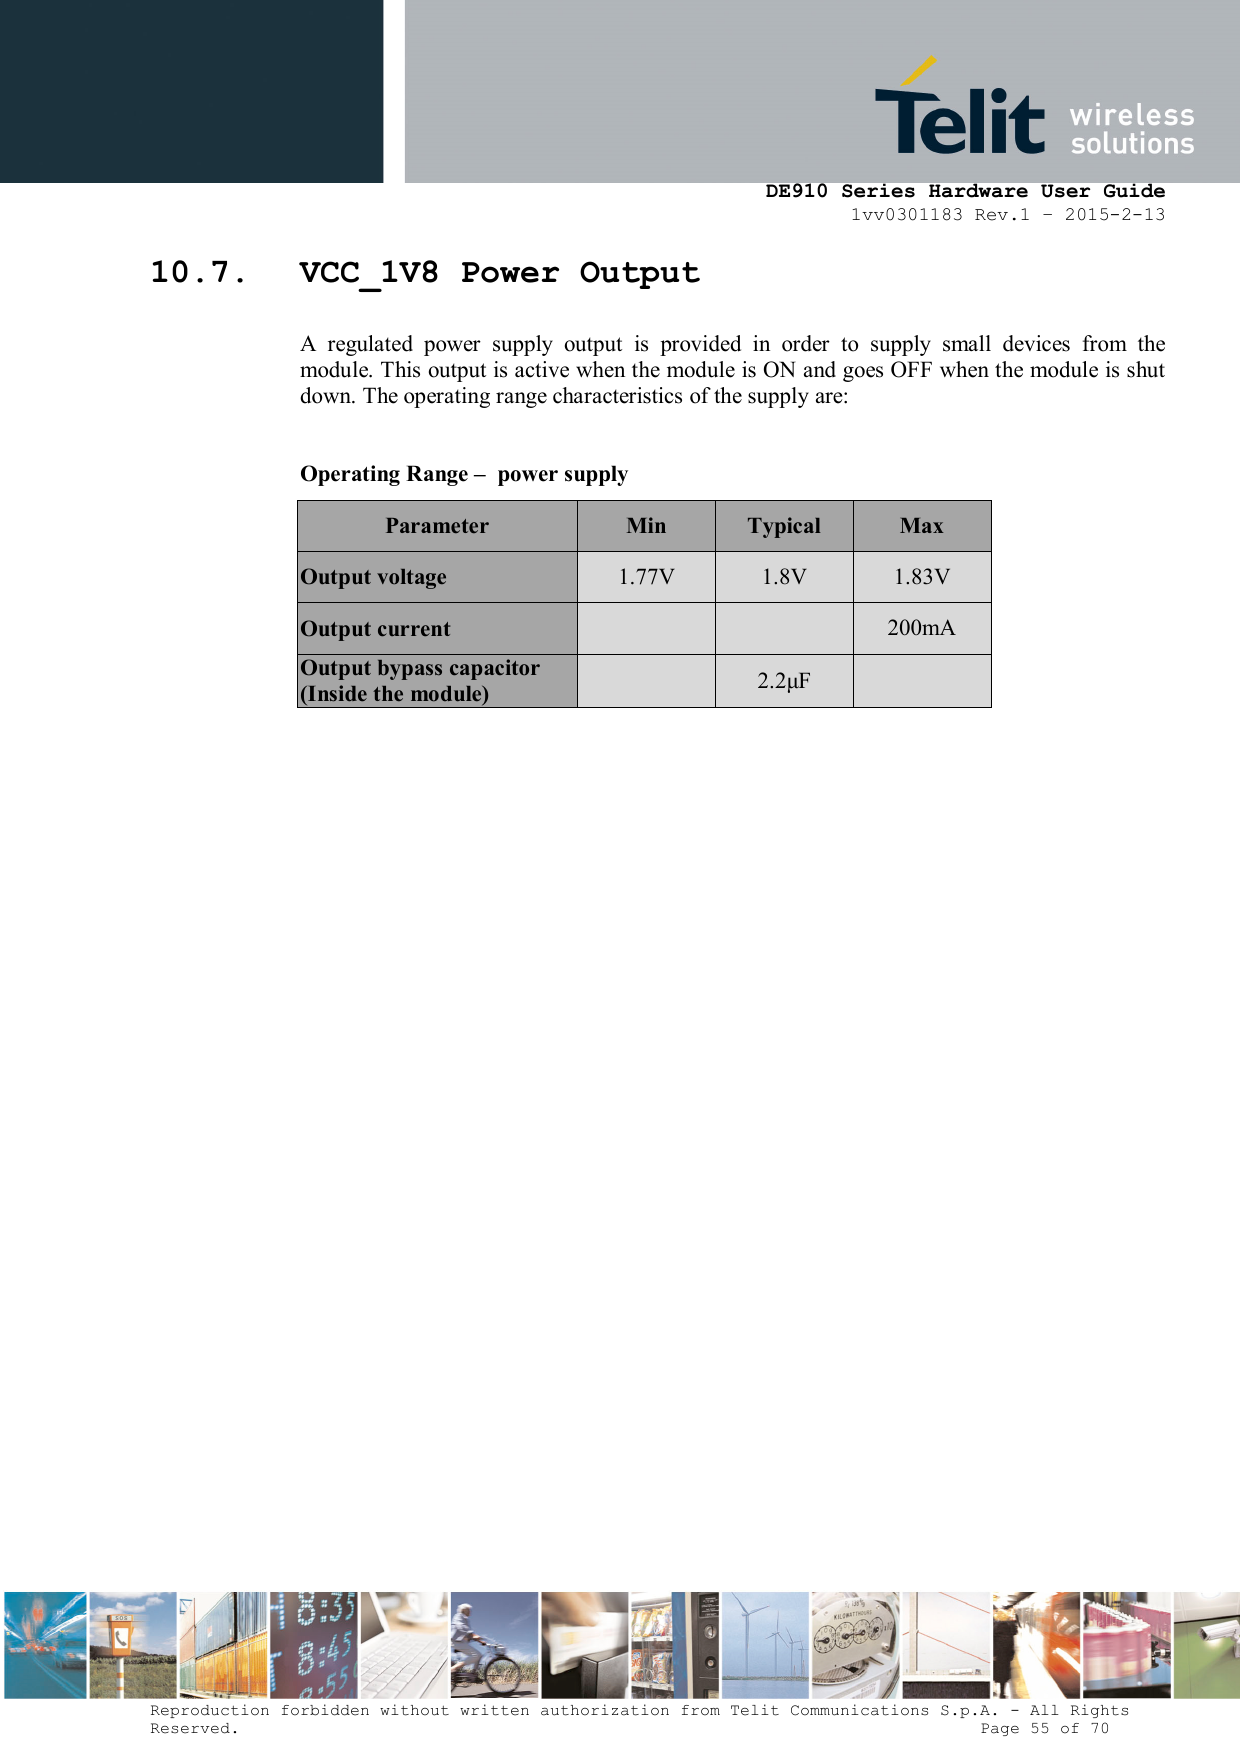      DE910 Series Hardware User Guide 1vv0301183 Rev.1 – 2015-2-13 Reproduction forbidden without written authorization from Telit Communications S.p.A. - All Rights Reserved.                                                                          Page 55 of 70 10.7. VCC_1V8 Power Output A  regulated  power  supply  output  is  provided  in  order  to  supply  small  devices  from  the module. This output is active when the module is ON and goes OFF when the module is shut down. The operating range characteristics of the supply are:  Operating Range –  power supply Parameter  Min  Typical  Max Output voltage  1.77V  1.8V  1.83V Output current      200mA Output bypass capacitor (Inside the module)    2.2μF   